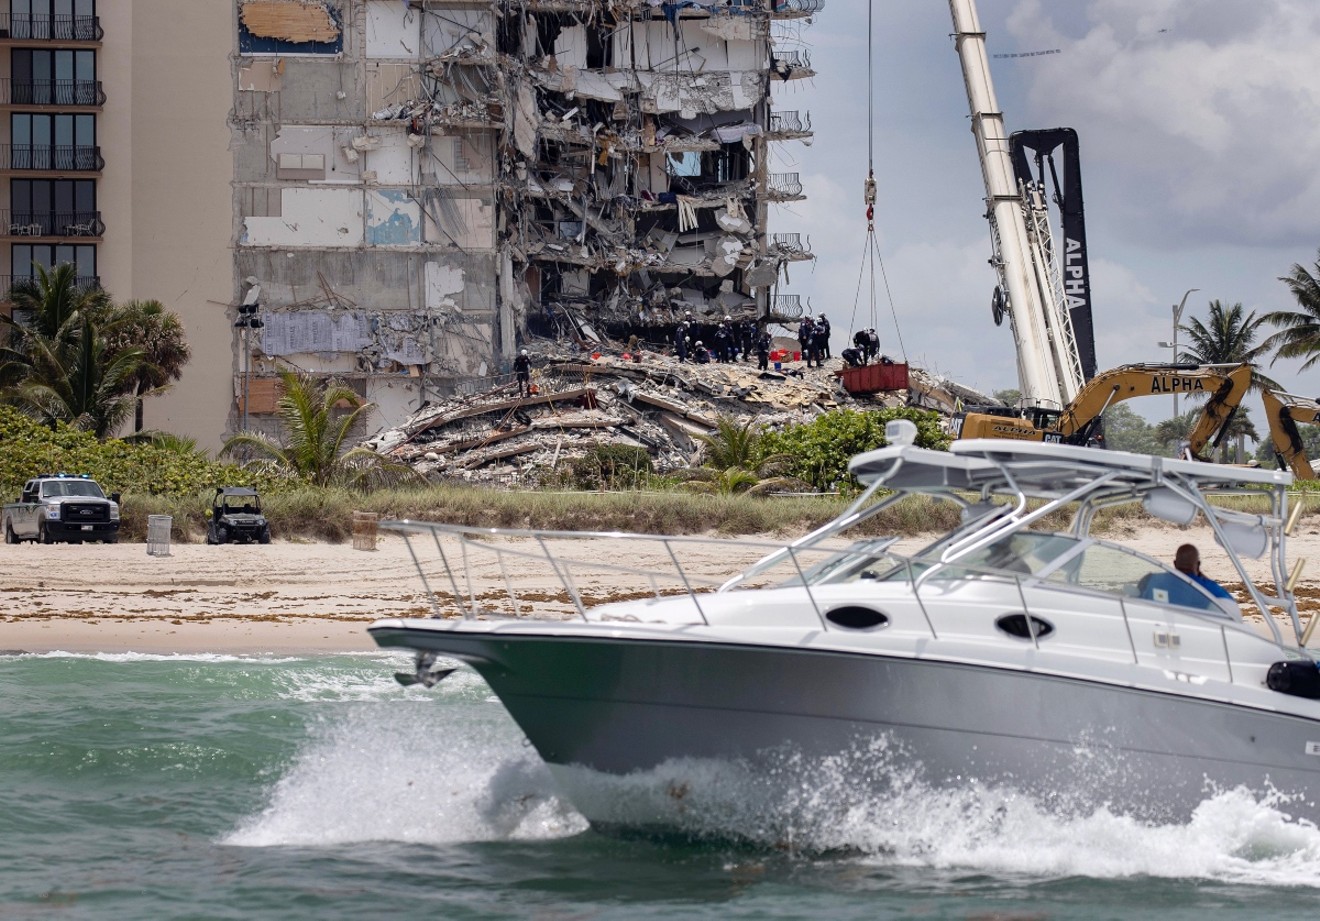 A boat passes off shore as members of the South Florida Urban Search and Rescue team look for possible survivors.